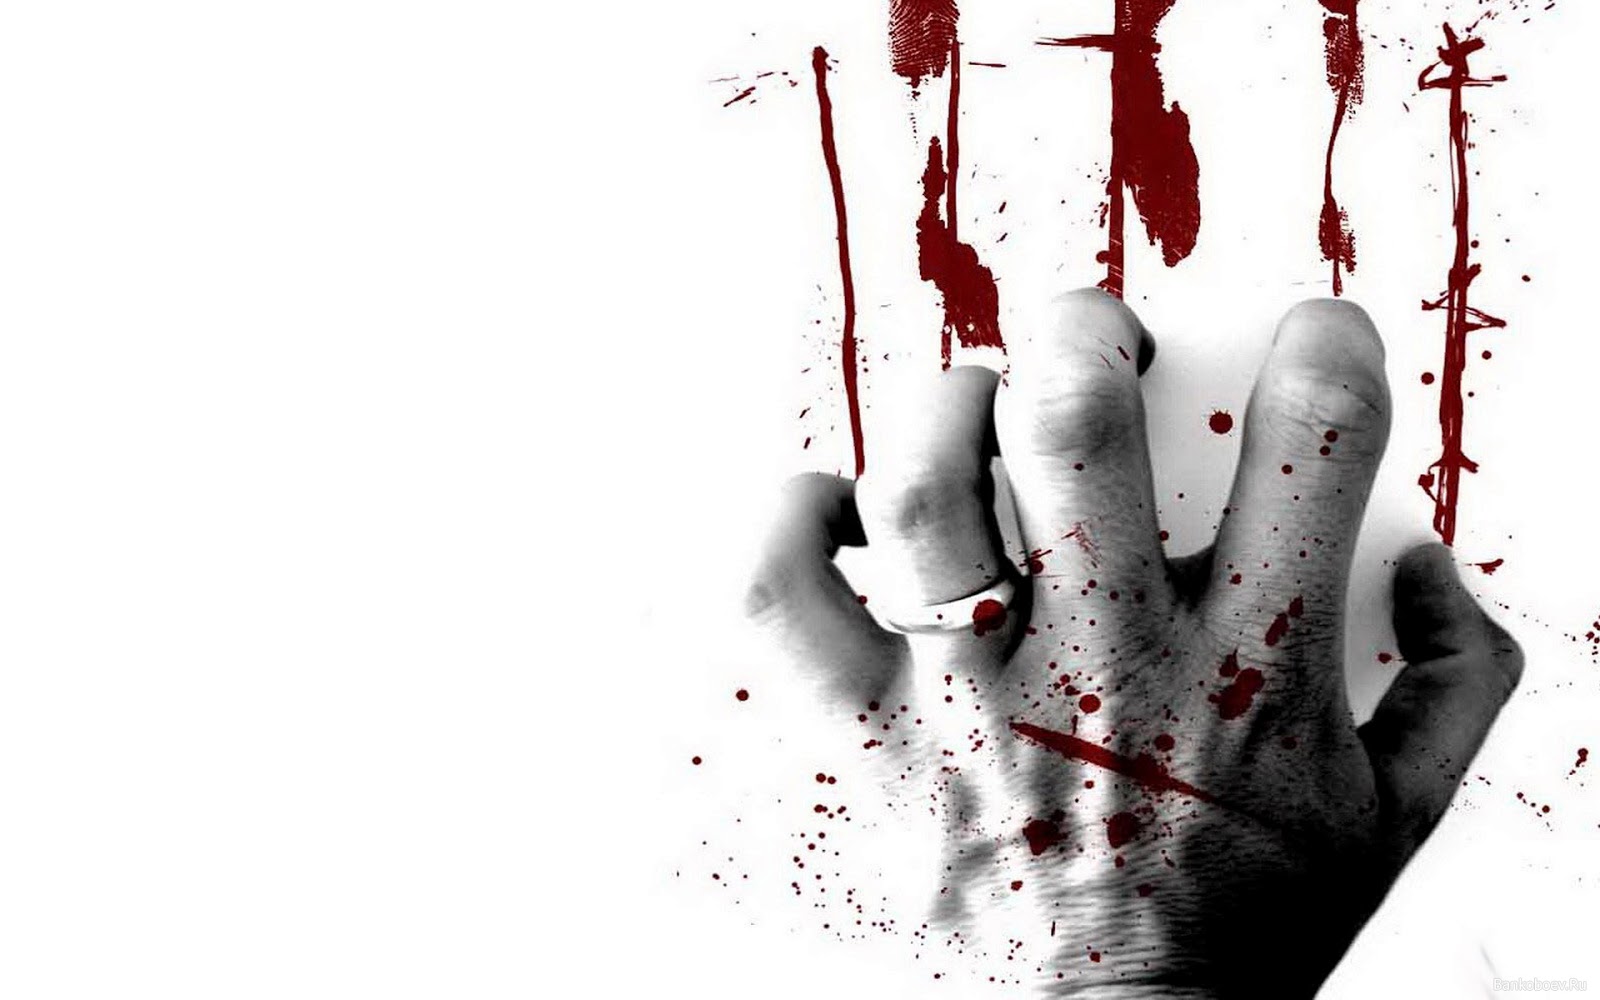 Bloody Widescreen Wallpaper HD And Make Your Desktop Cool